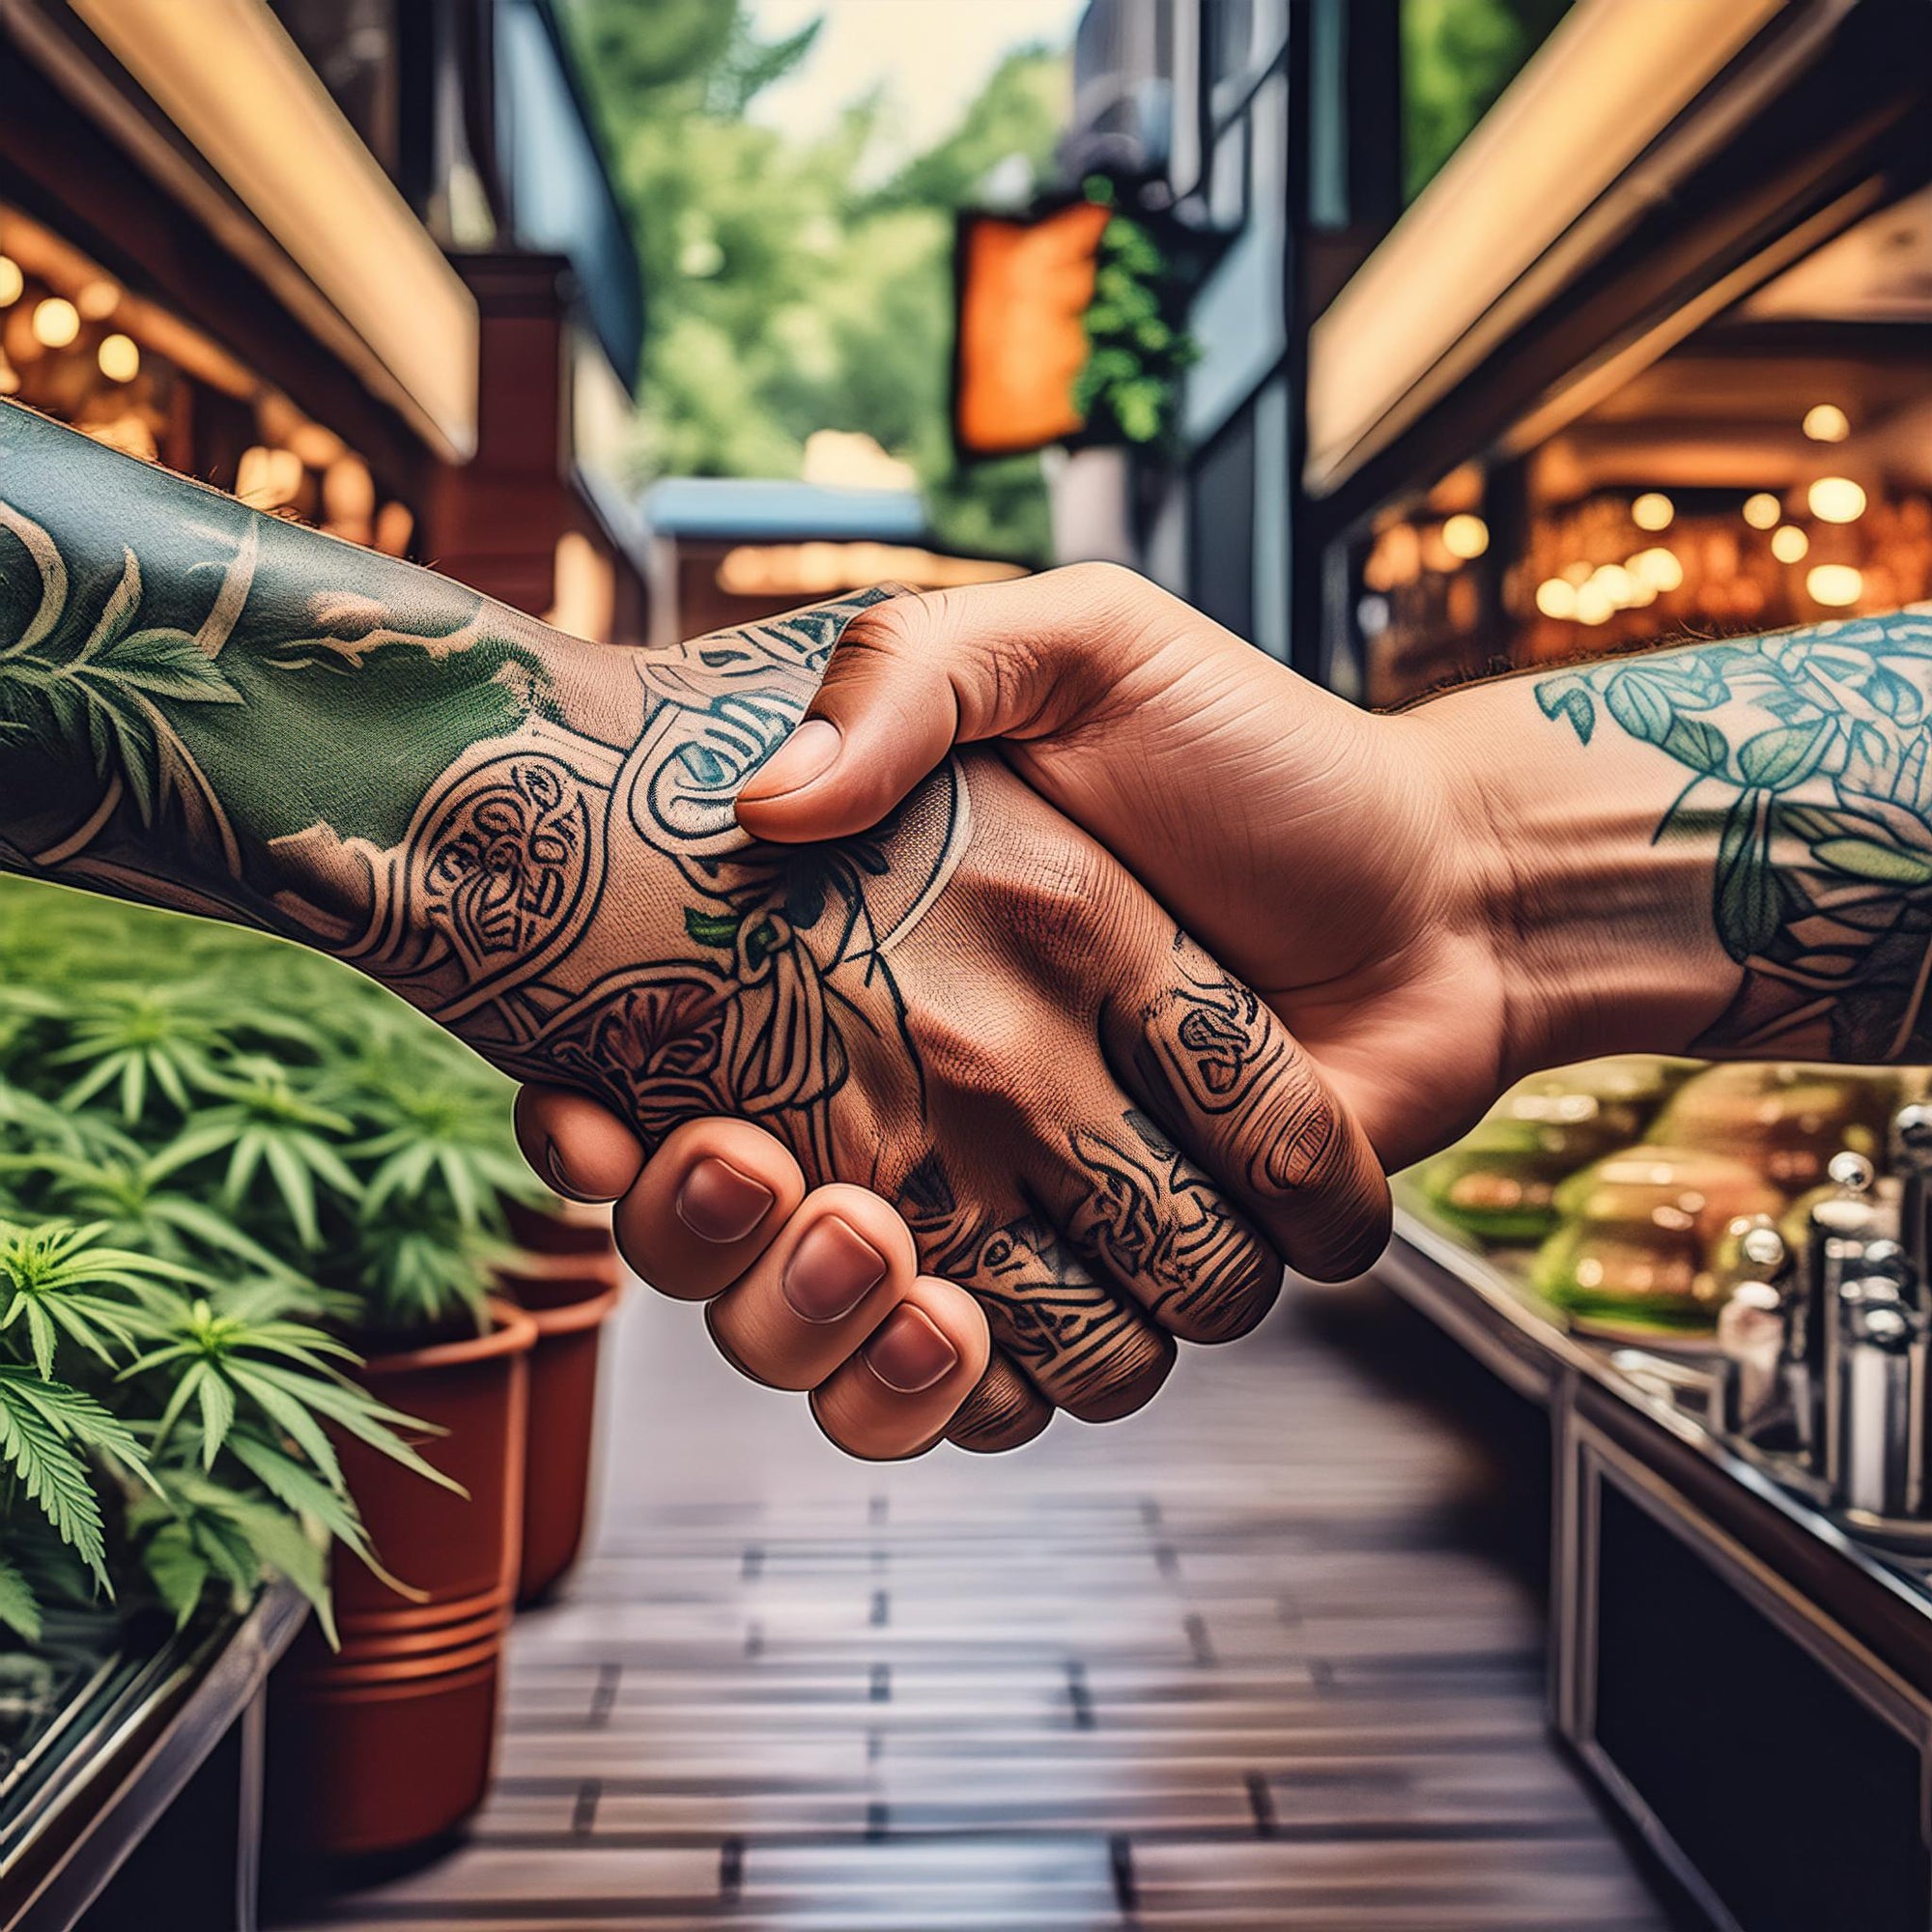 3 Reasons Why You Should Support Your Local Smoke Shop